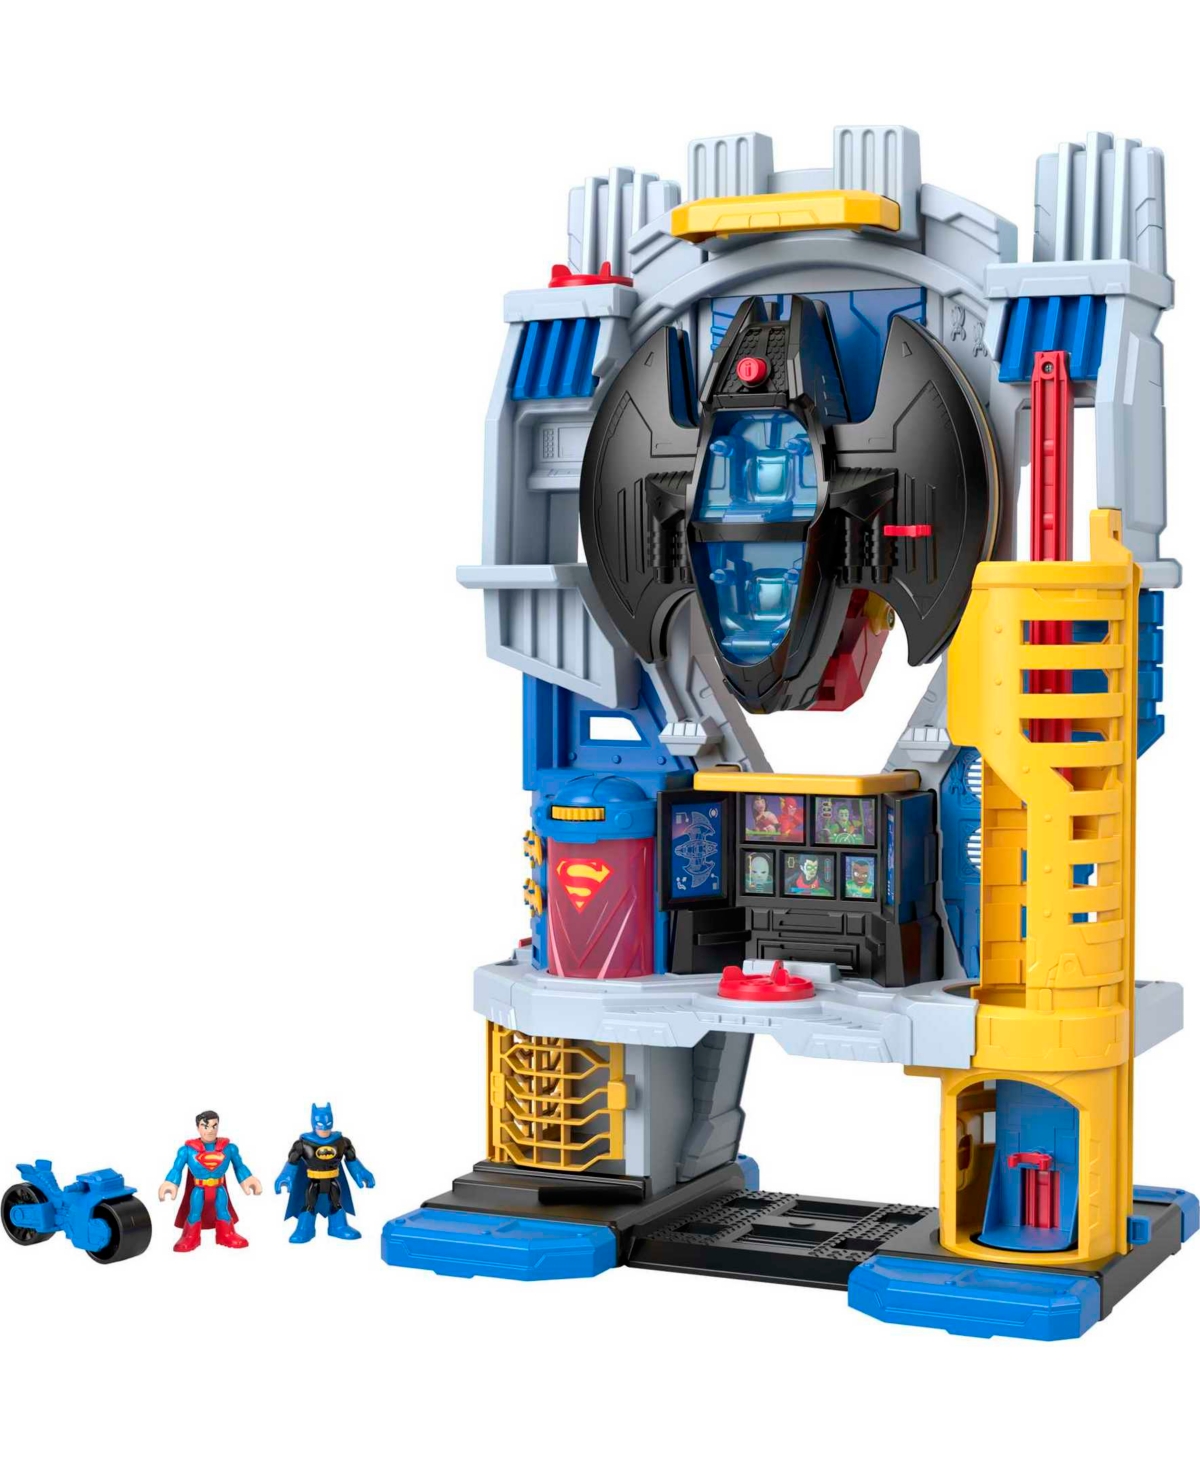 Fisher Price Kids' Imaginext Dc Super Friends Ultimate Headquarters Playset With Batman Figure In Multi-color